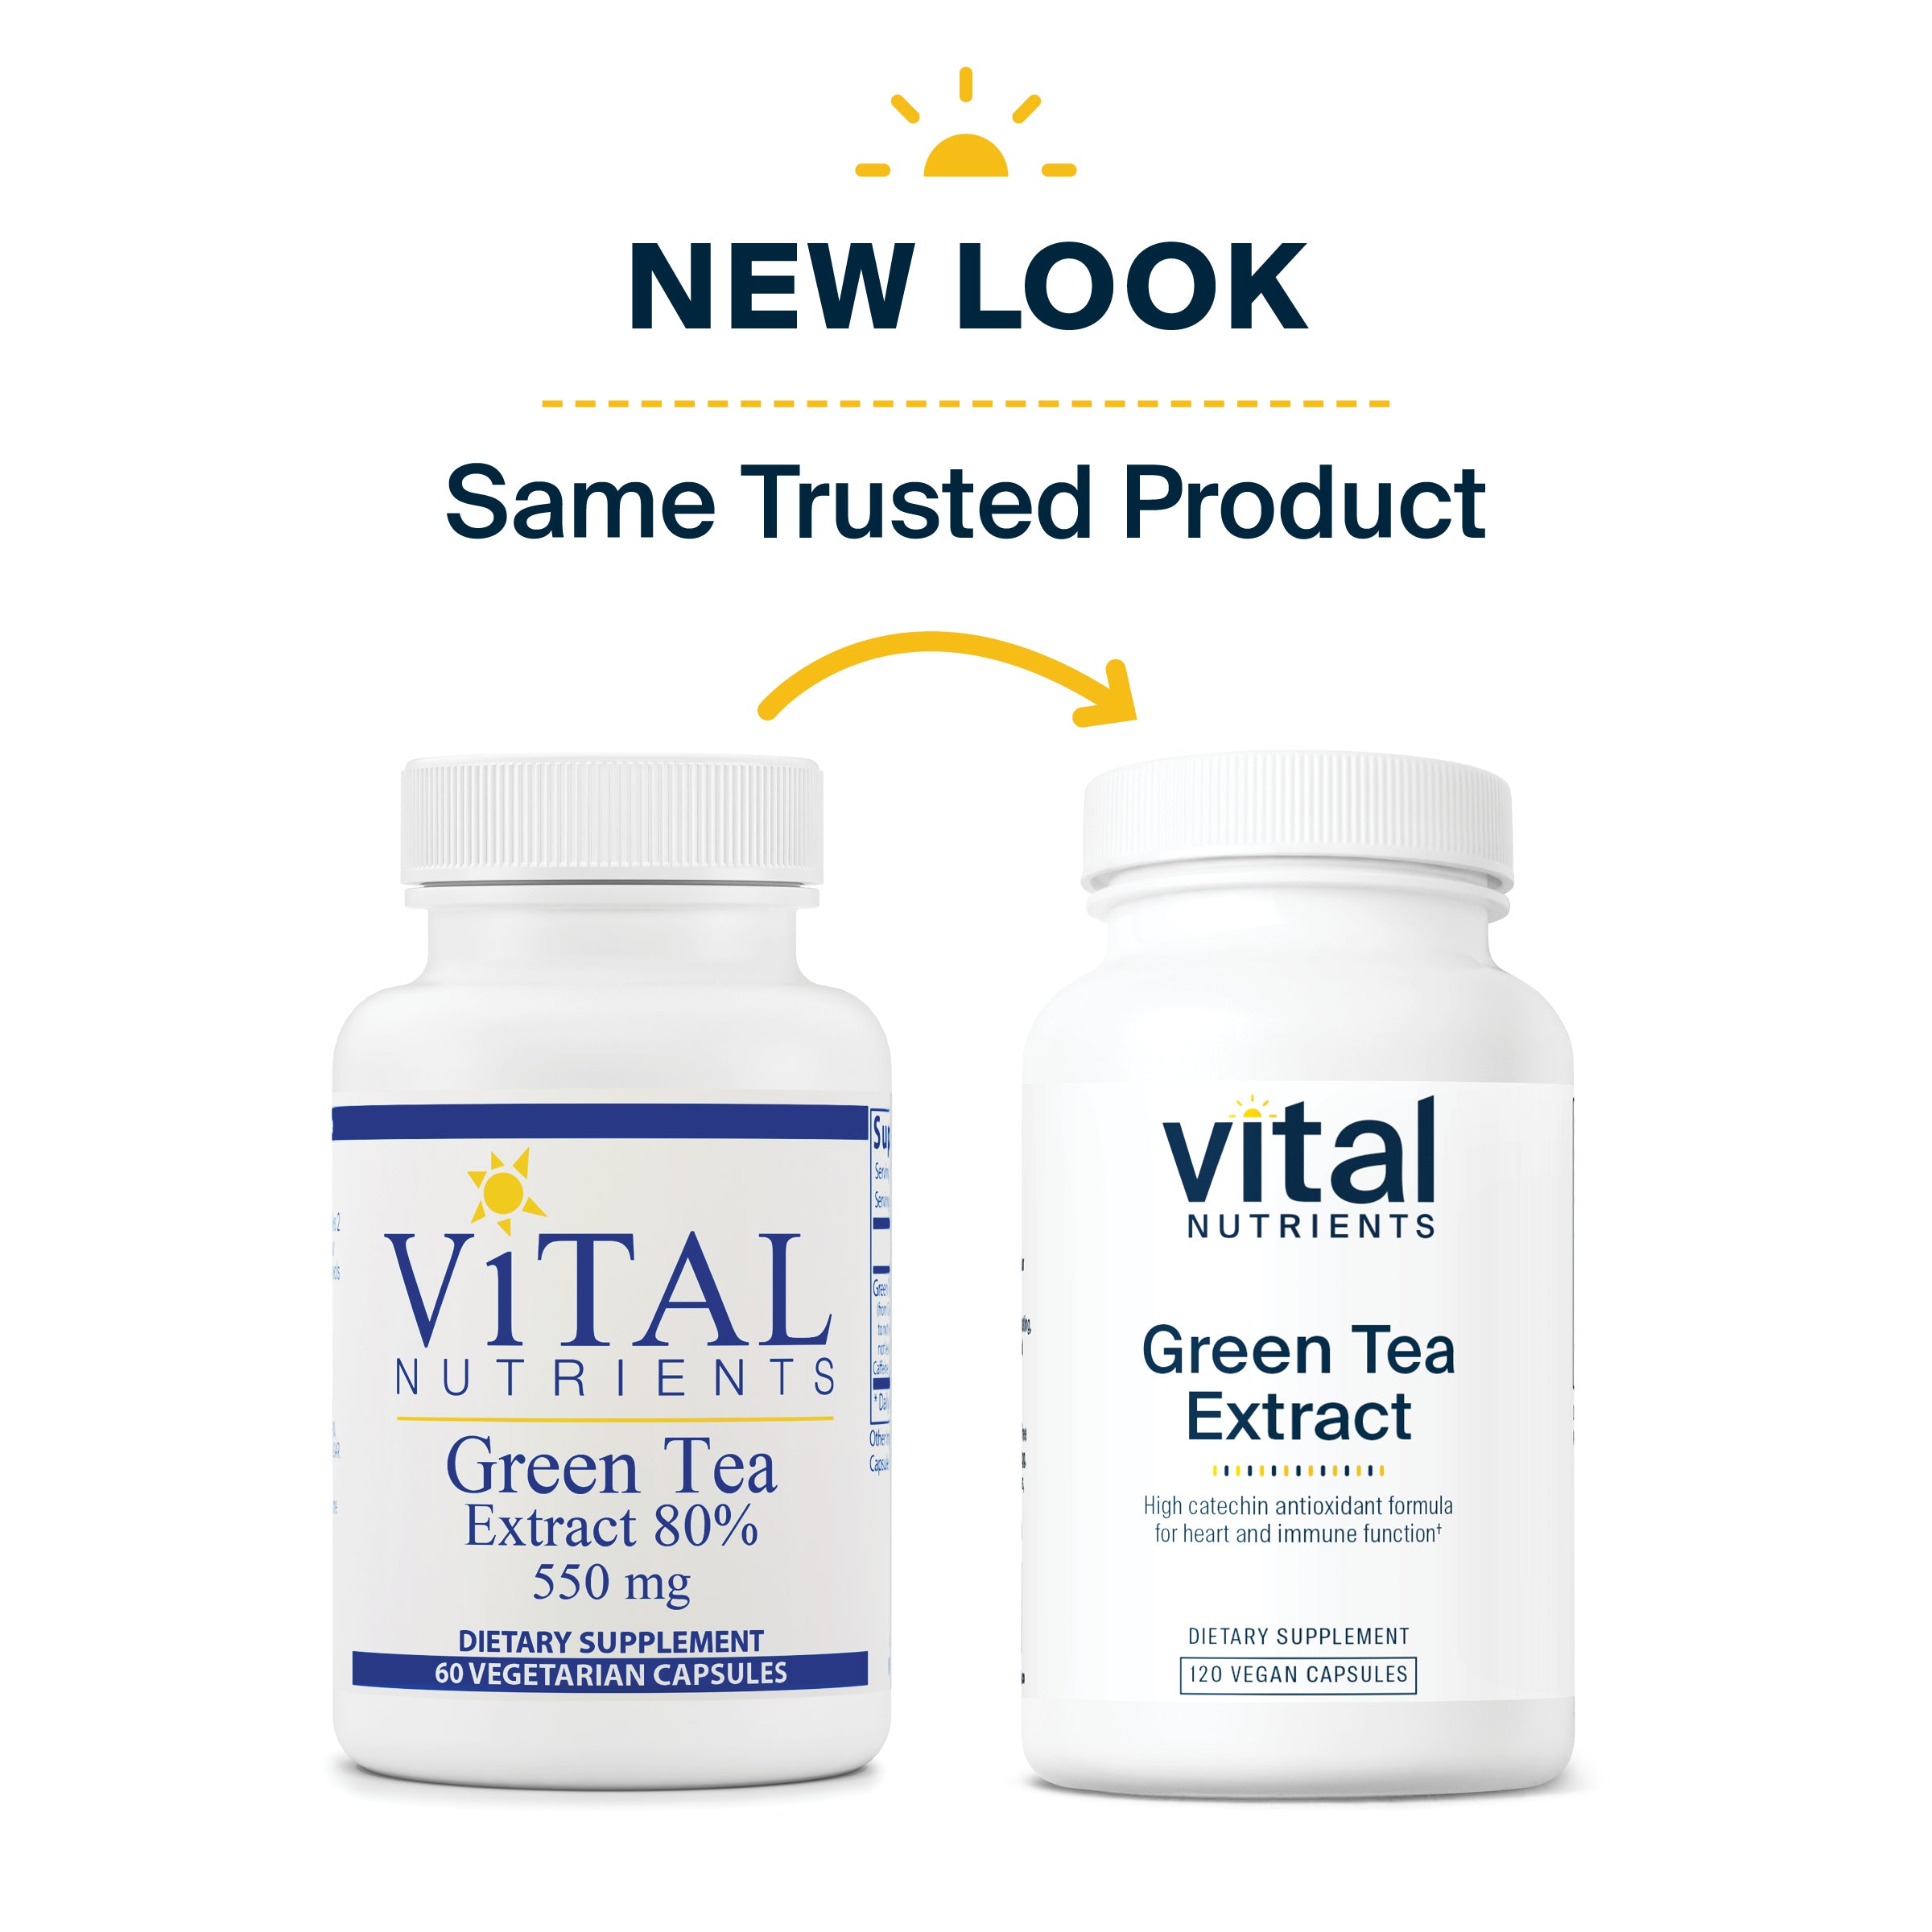 Vital Nutrients New Look Same Trusted Product for Green Tea Extract